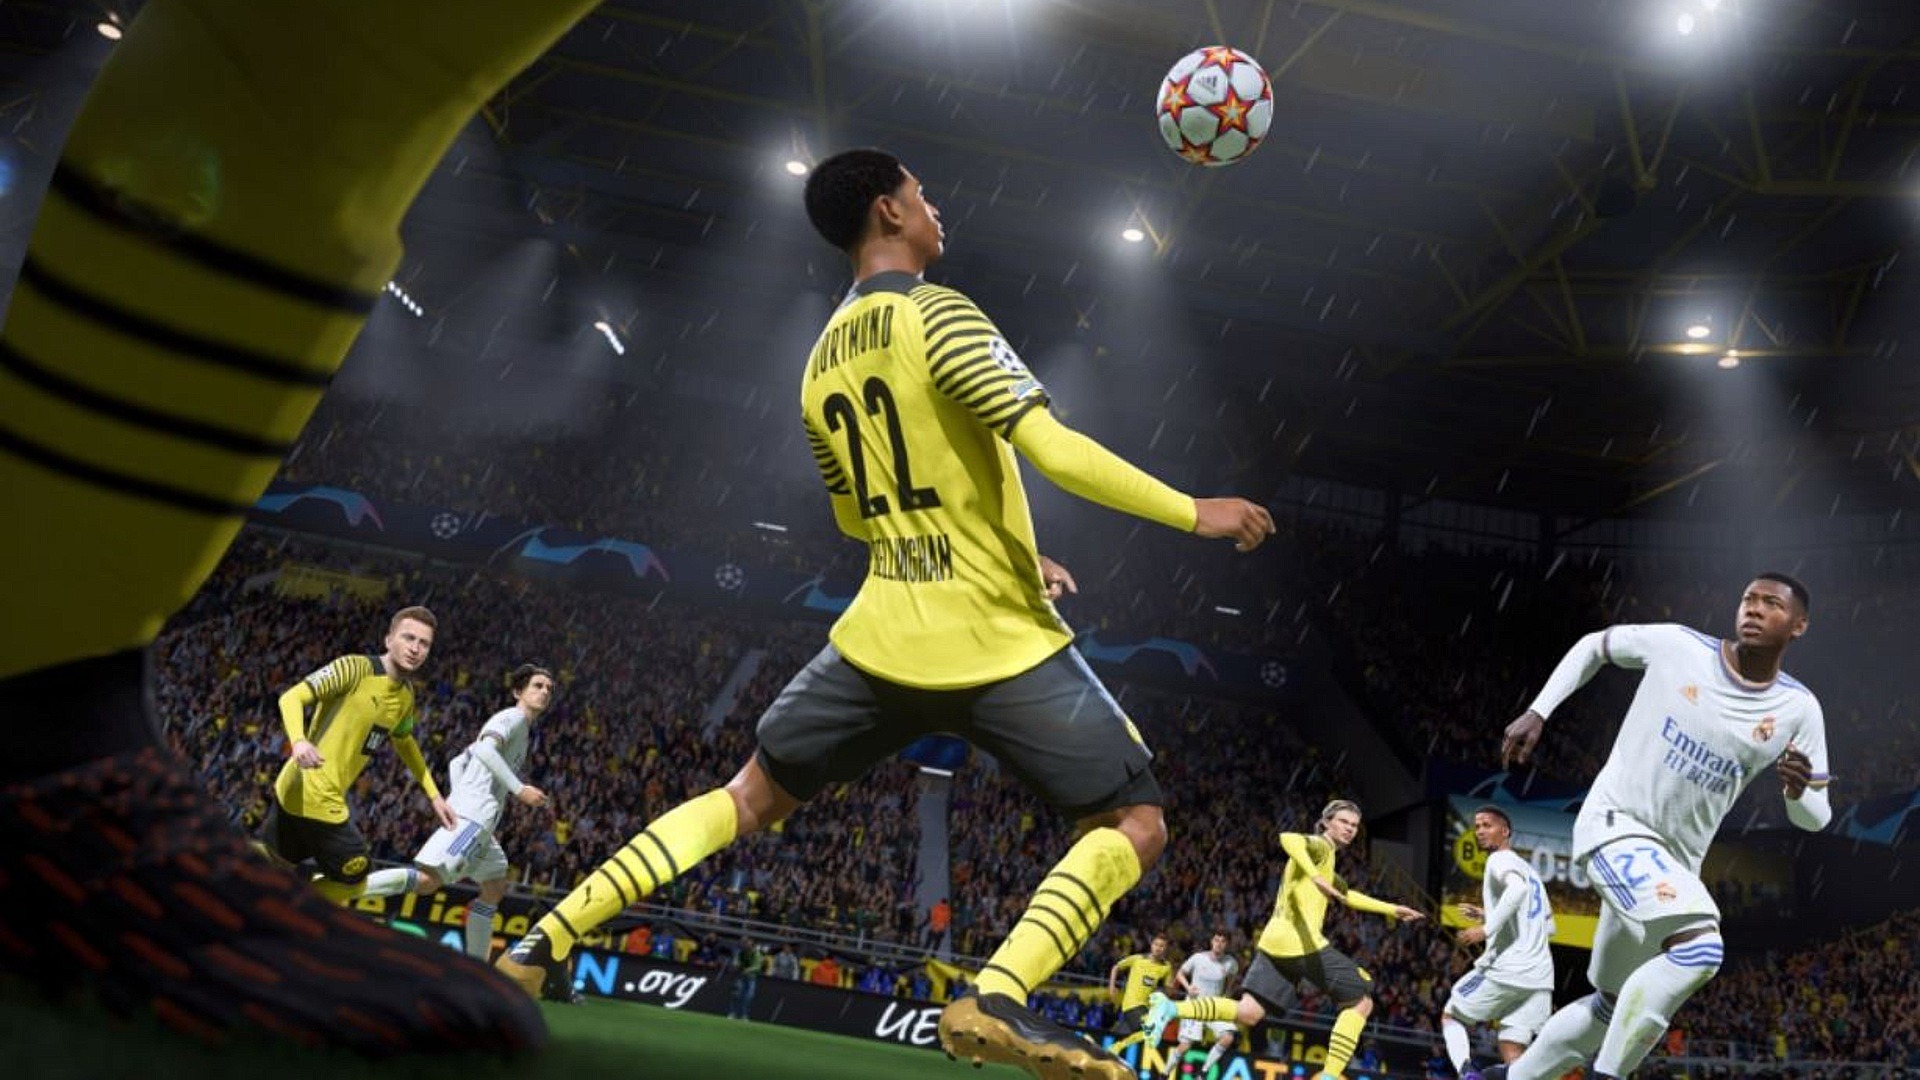 FIFA 22 player looks at ball in the air